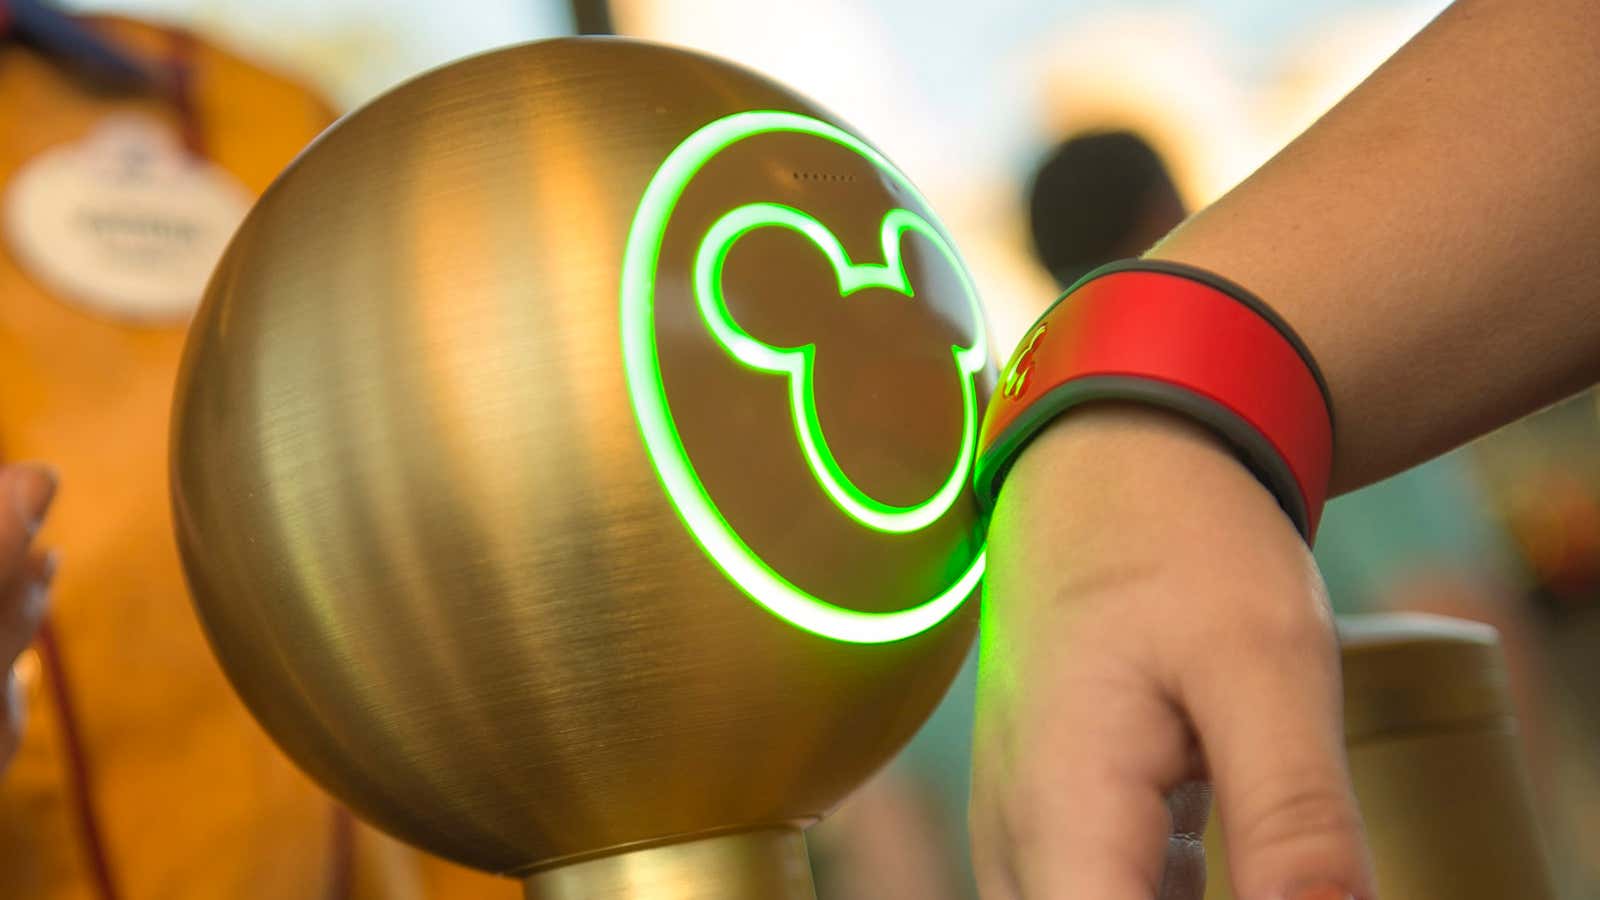 Disney and Dorsey have this in common: Both have launched payment systems.